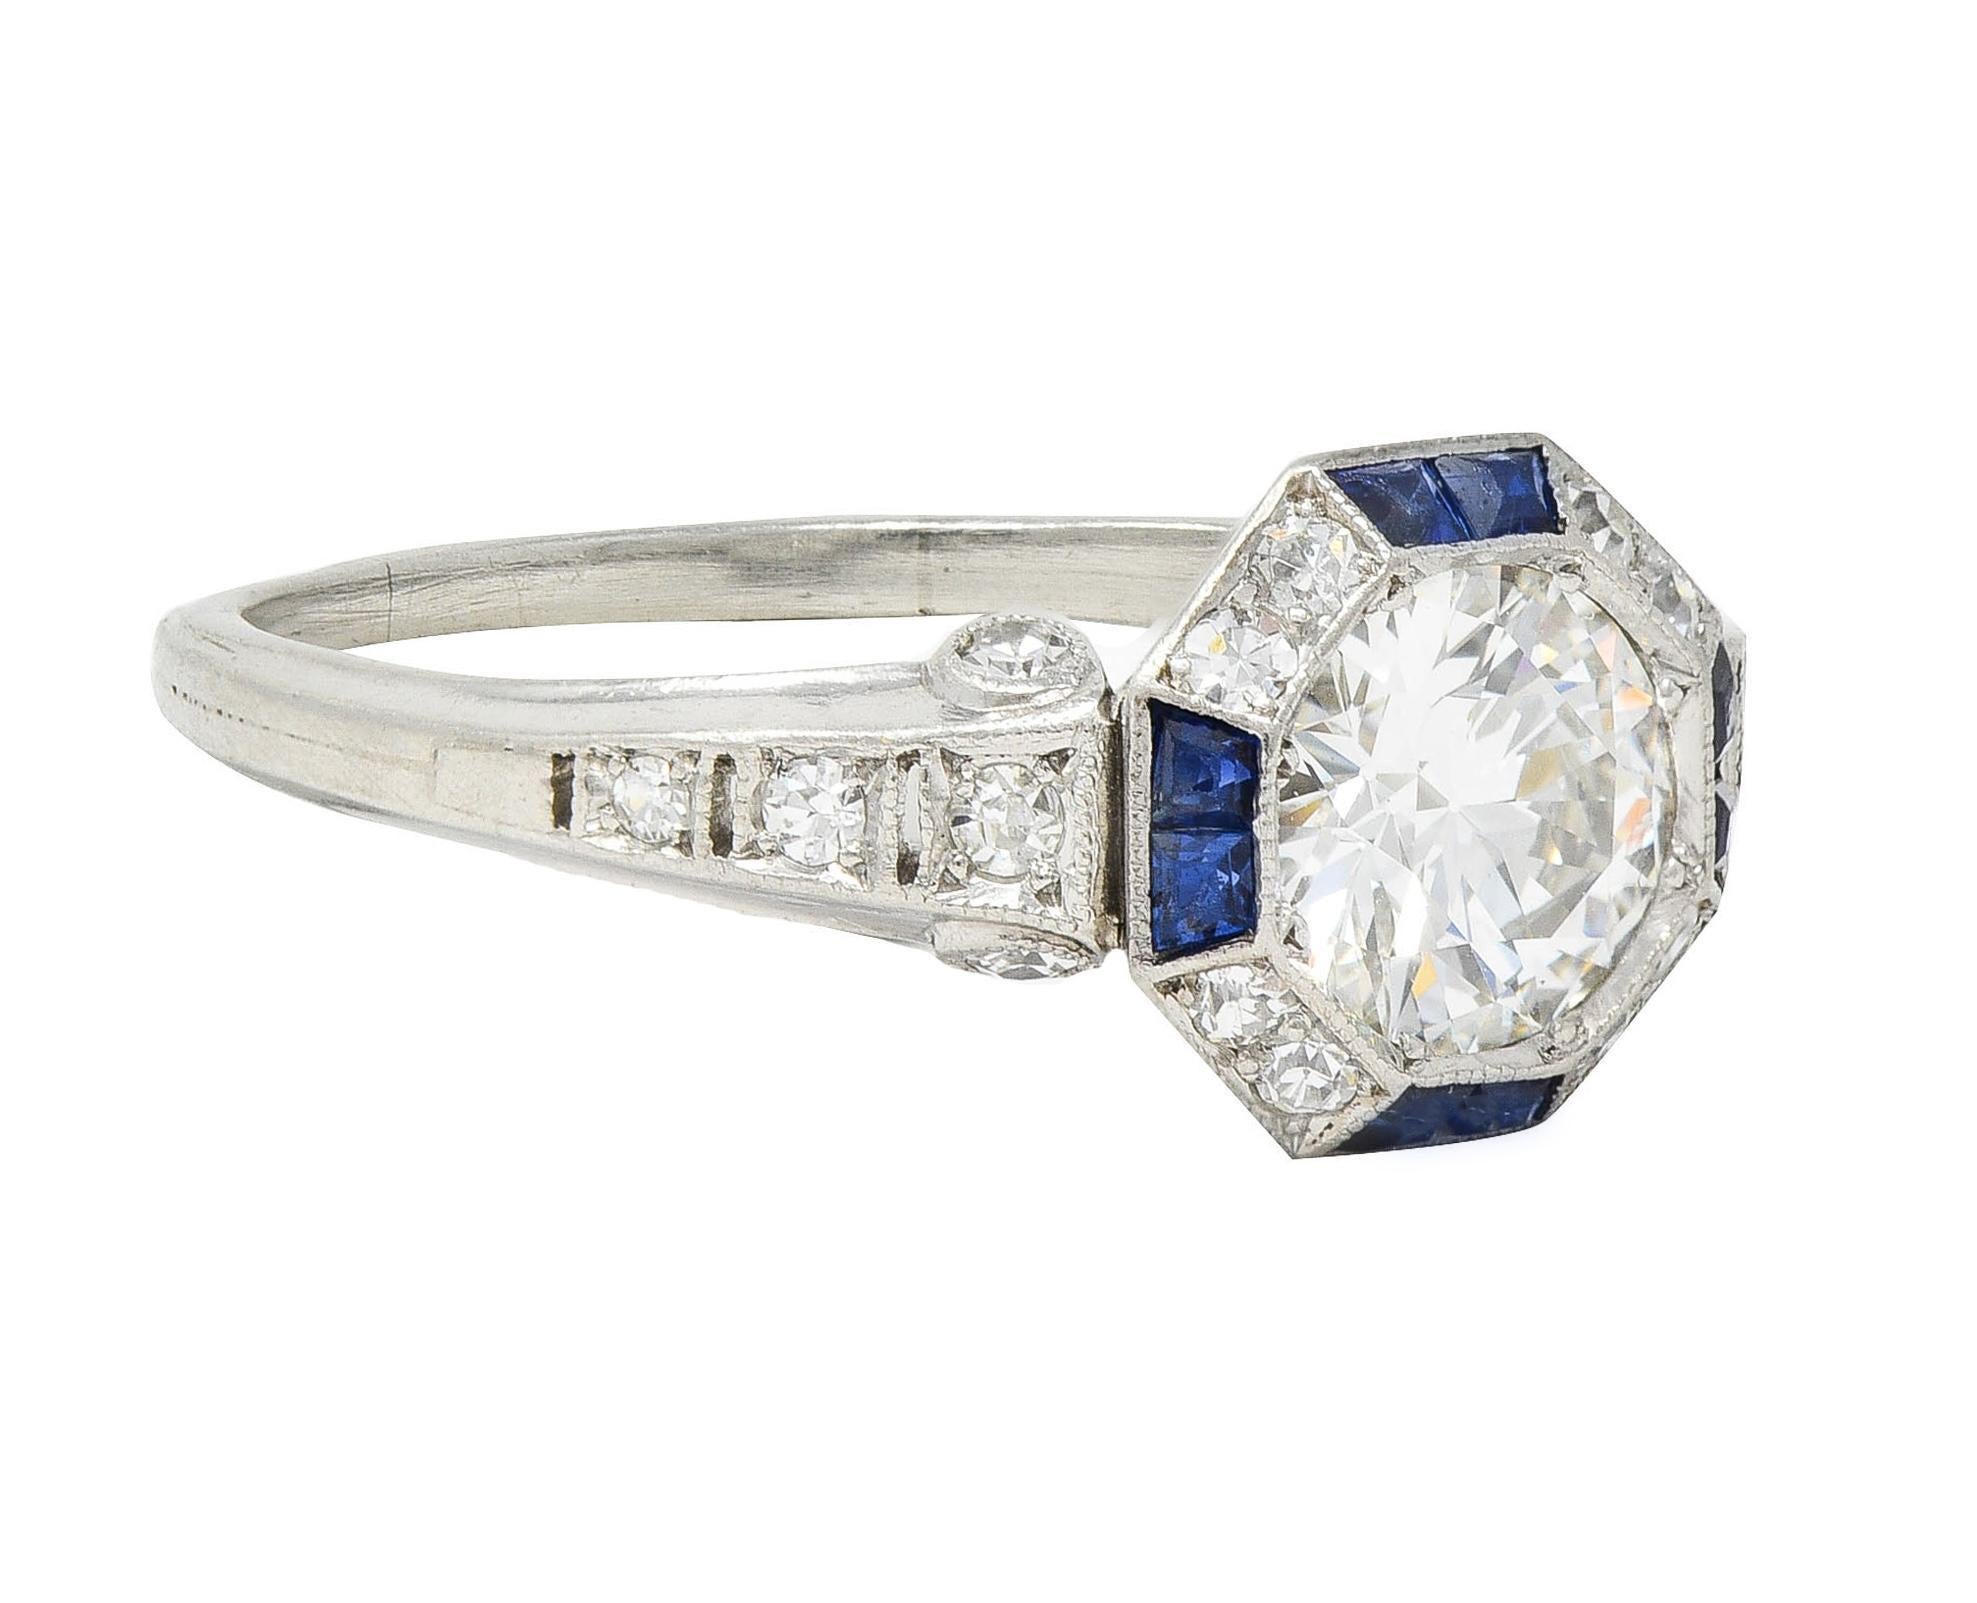 Centering an old European cut diamond weighing 0.90 carat total - G color with VS2 clarity 
Bead set flush in an octagonal form head with a faceted halo surround 
Featuring calibré cut sapphires weighing approximately 0.28 carat total
Transparent